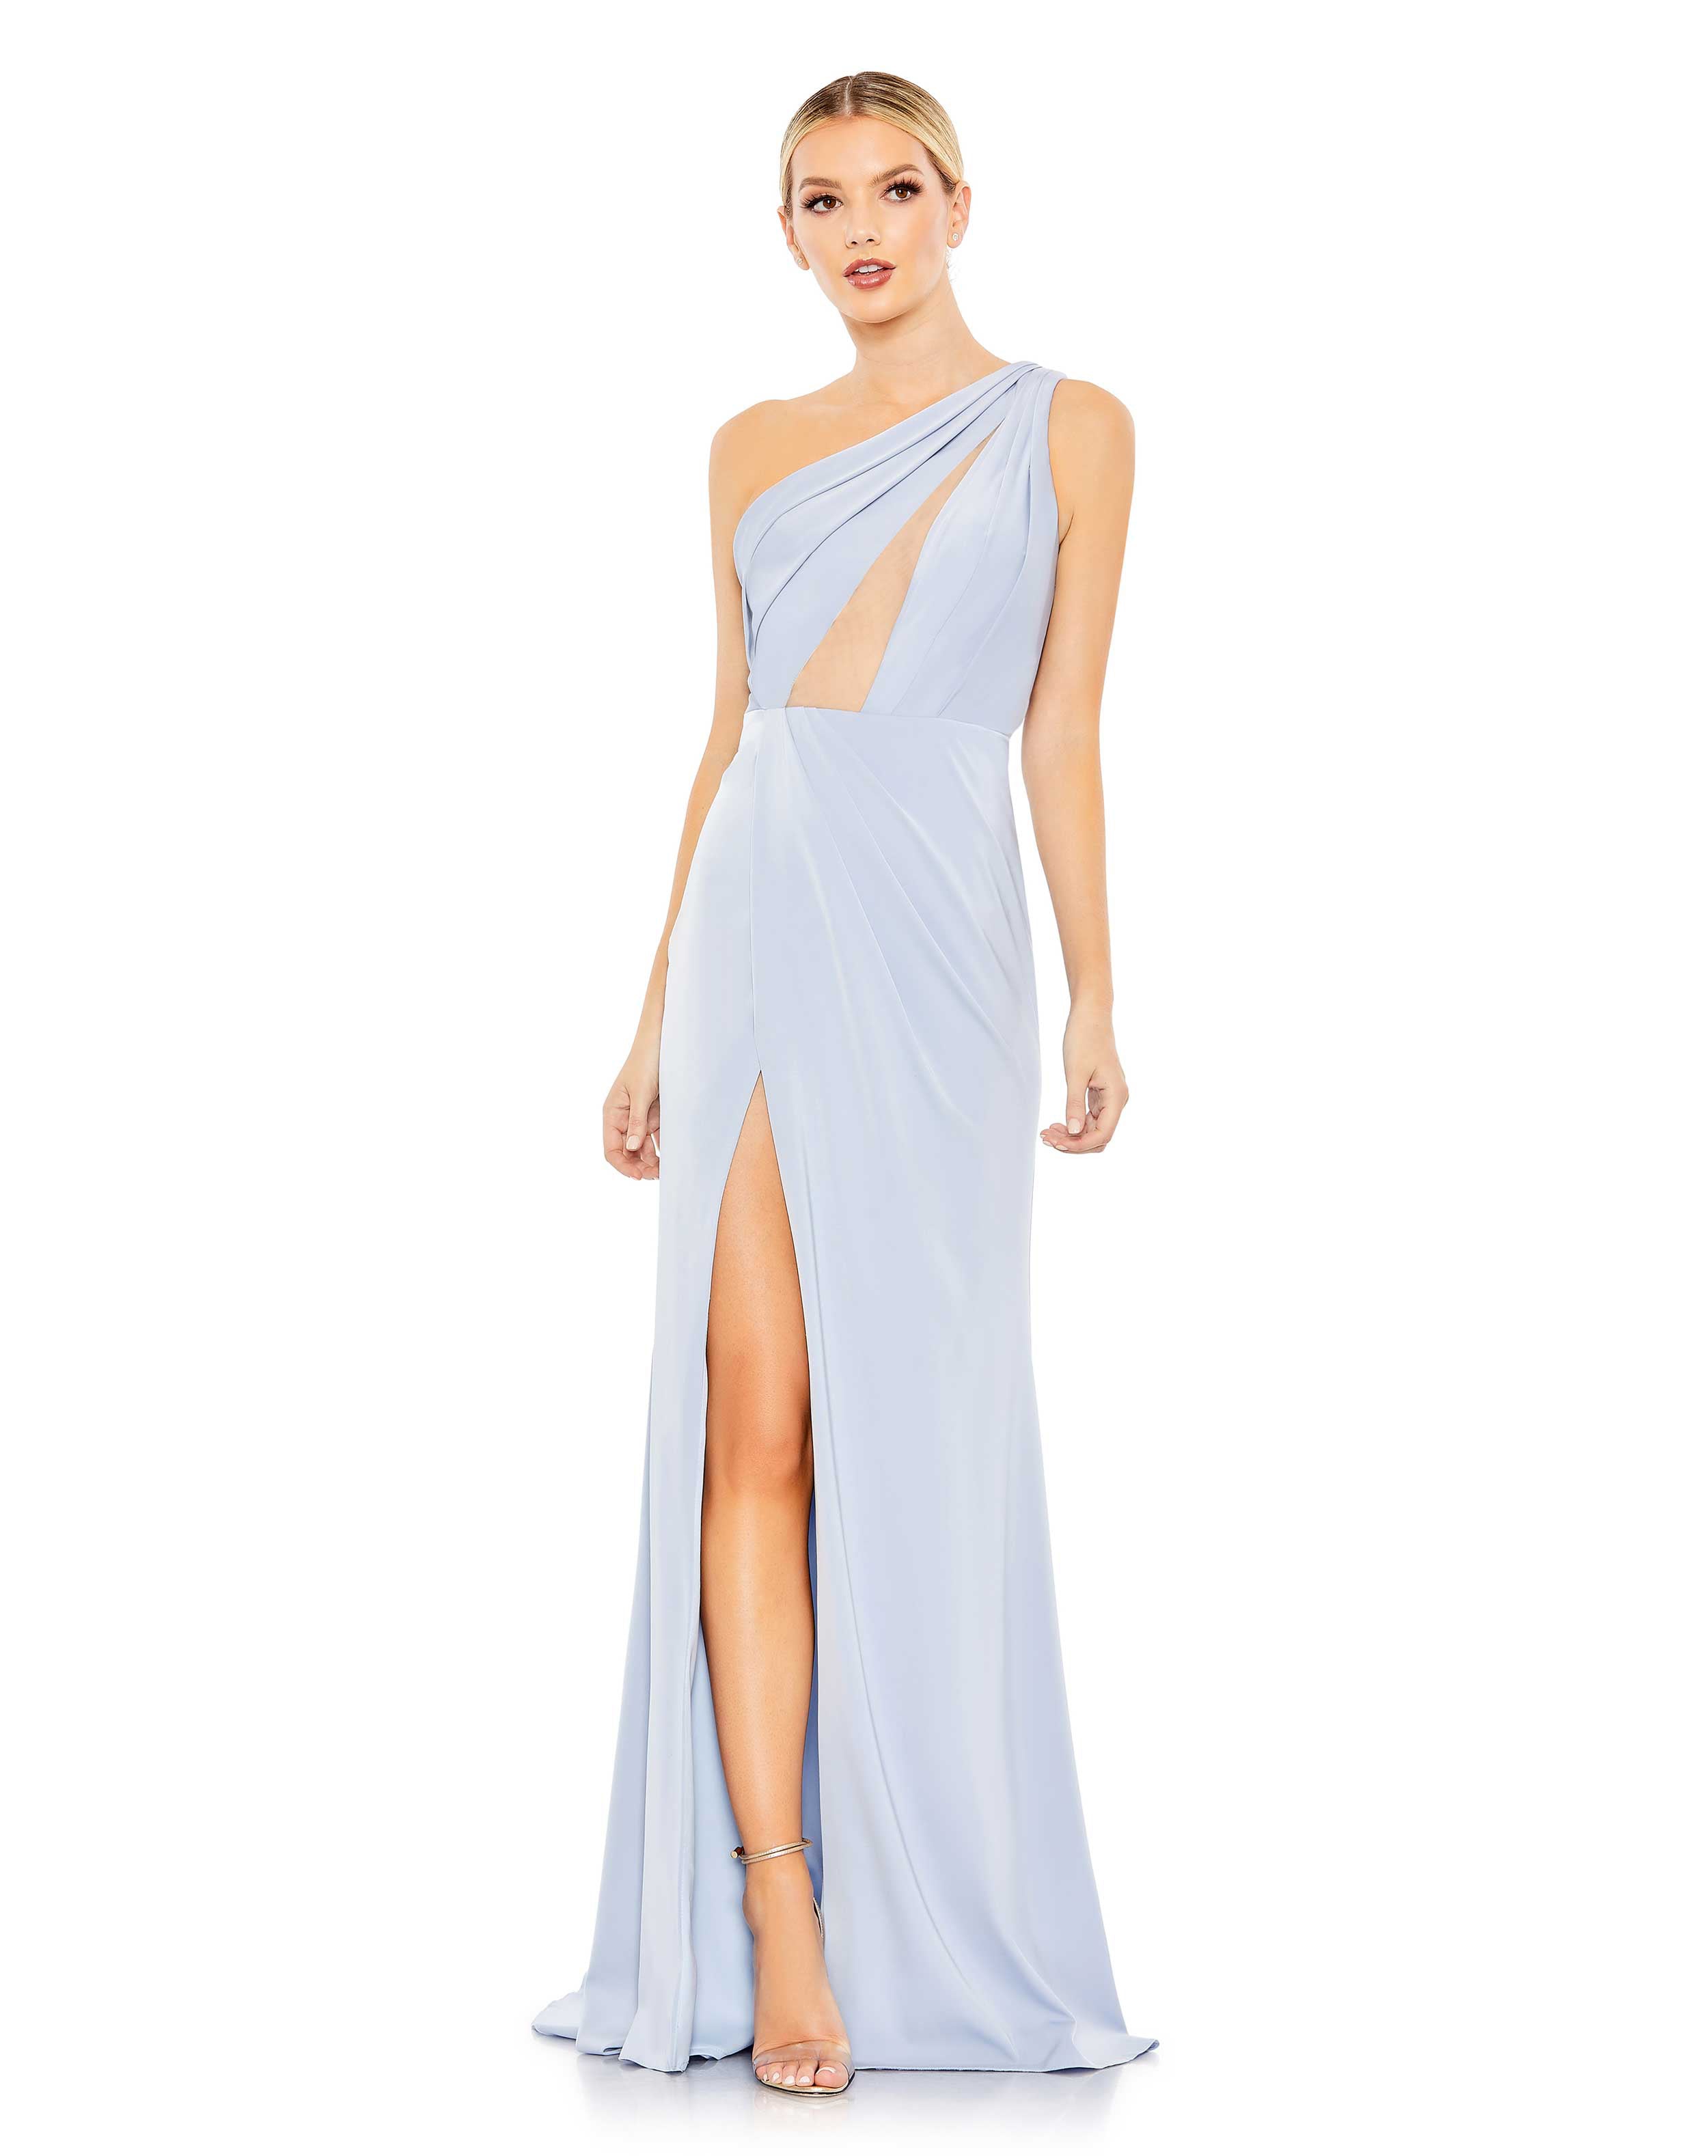 Draped One Shoulder Illusion Cut Out Trumpet Gown